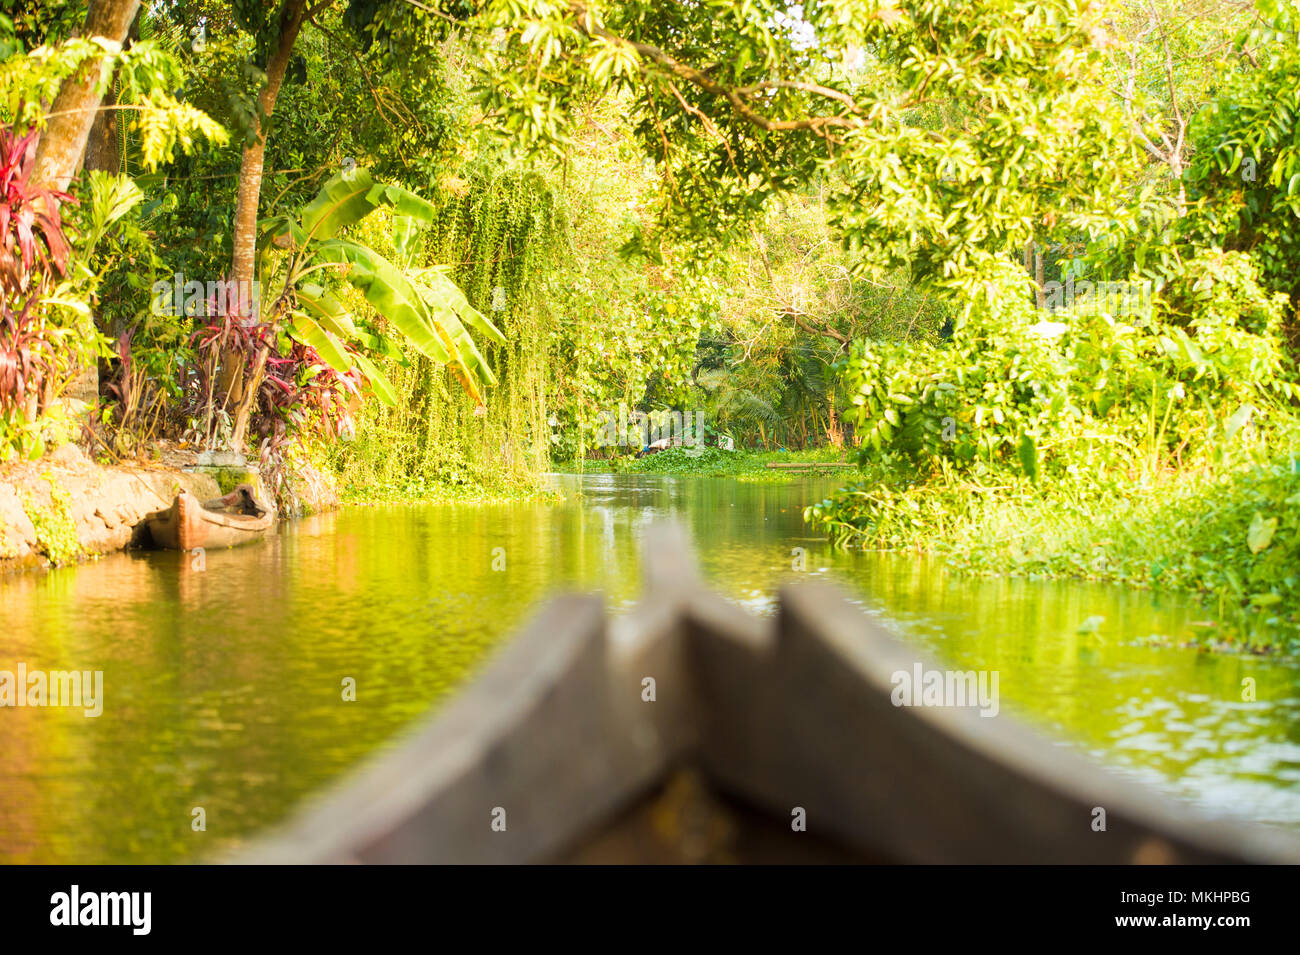 Blurred canoe sailing on the lush and green backwaters in Alleppey, Kerala, India. Stock Photo